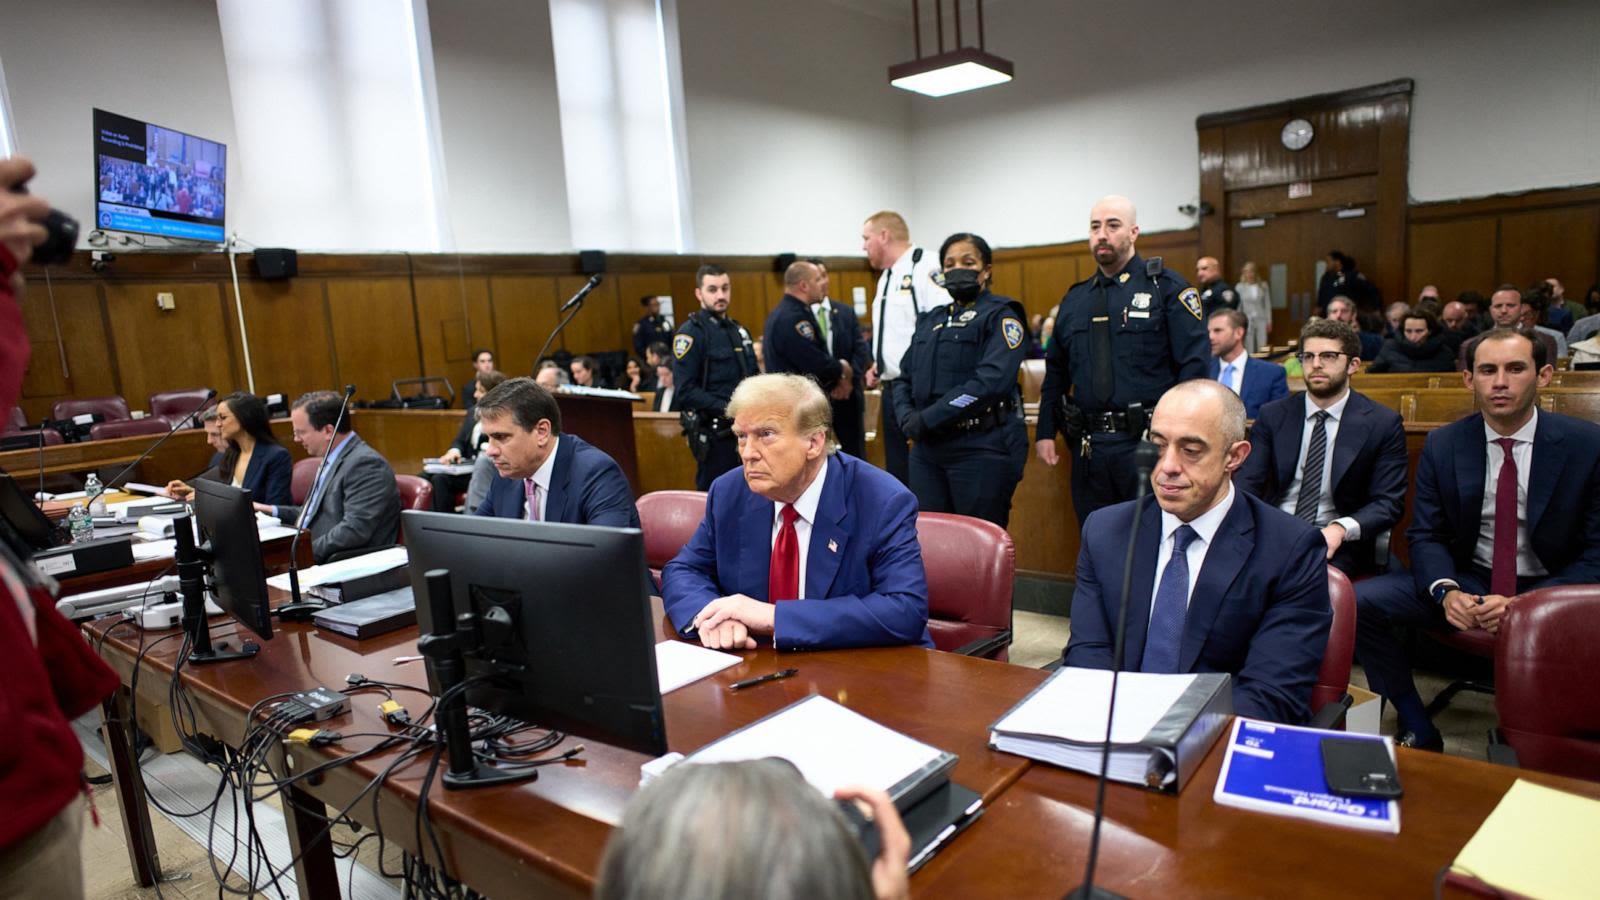 Trump trial live updates: Stories about alleged Trump affairs take spotlight